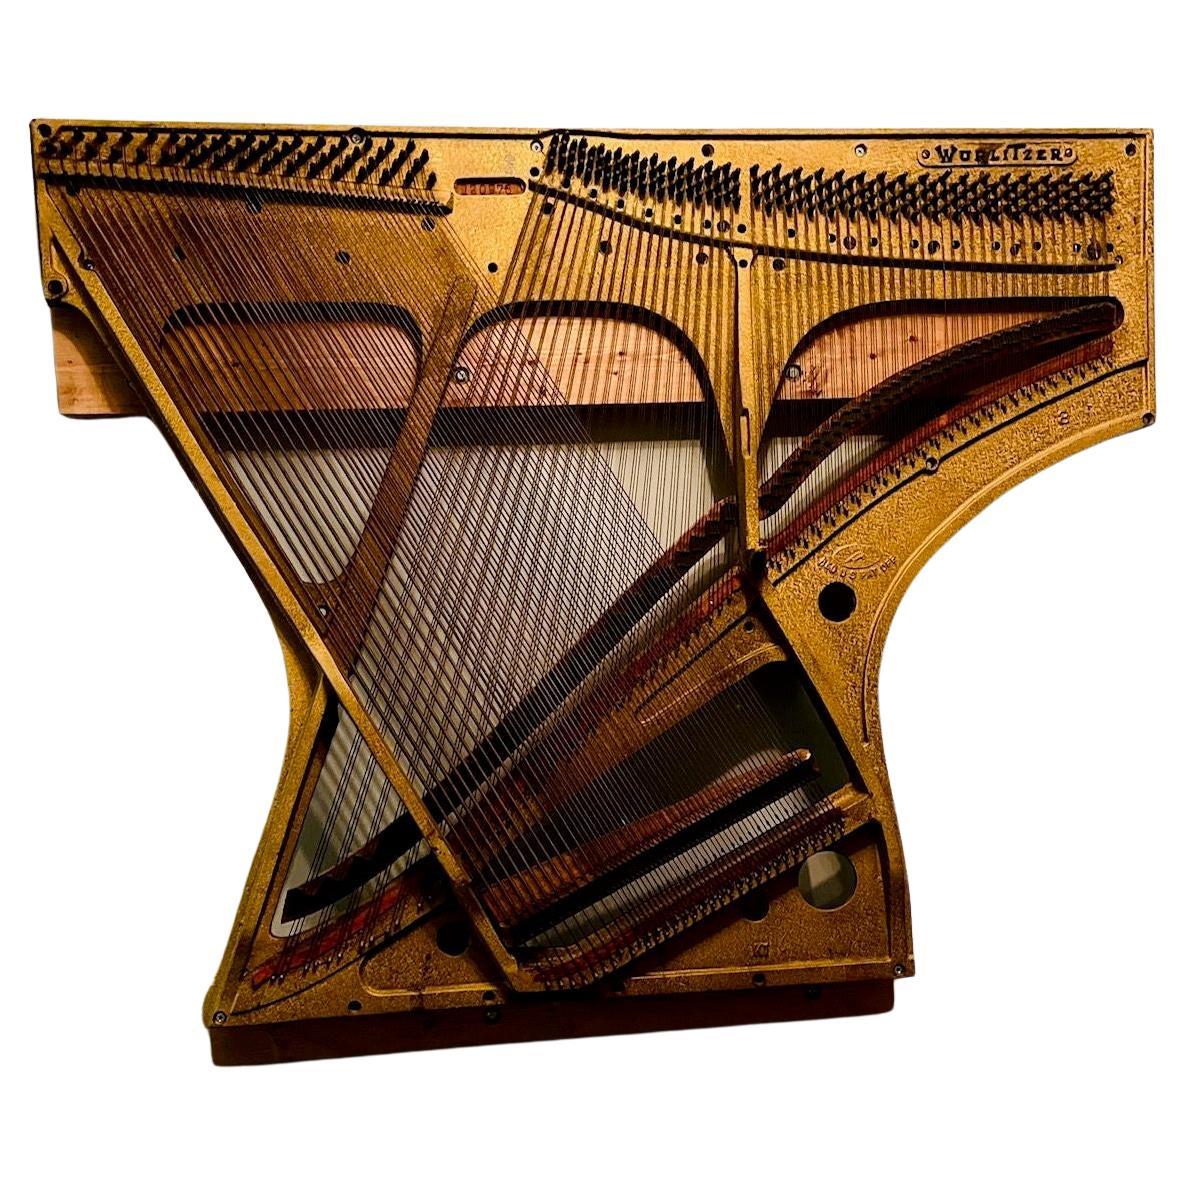 Wurlitzer Piano Wall Hanging For Sale